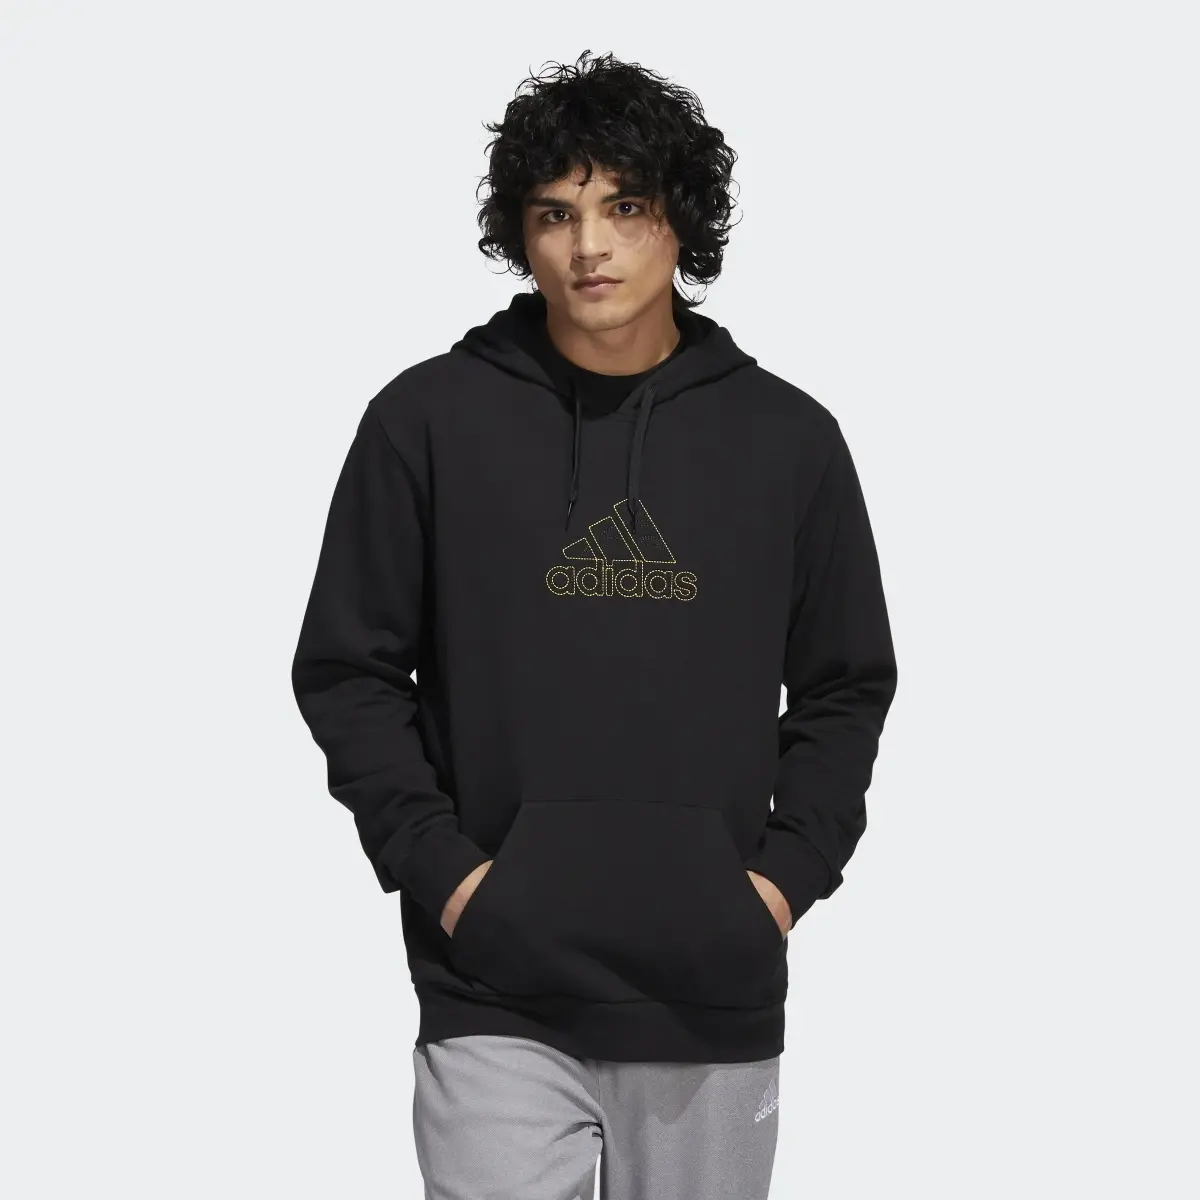 Adidas Embroidery Graphic Hoodie. 2